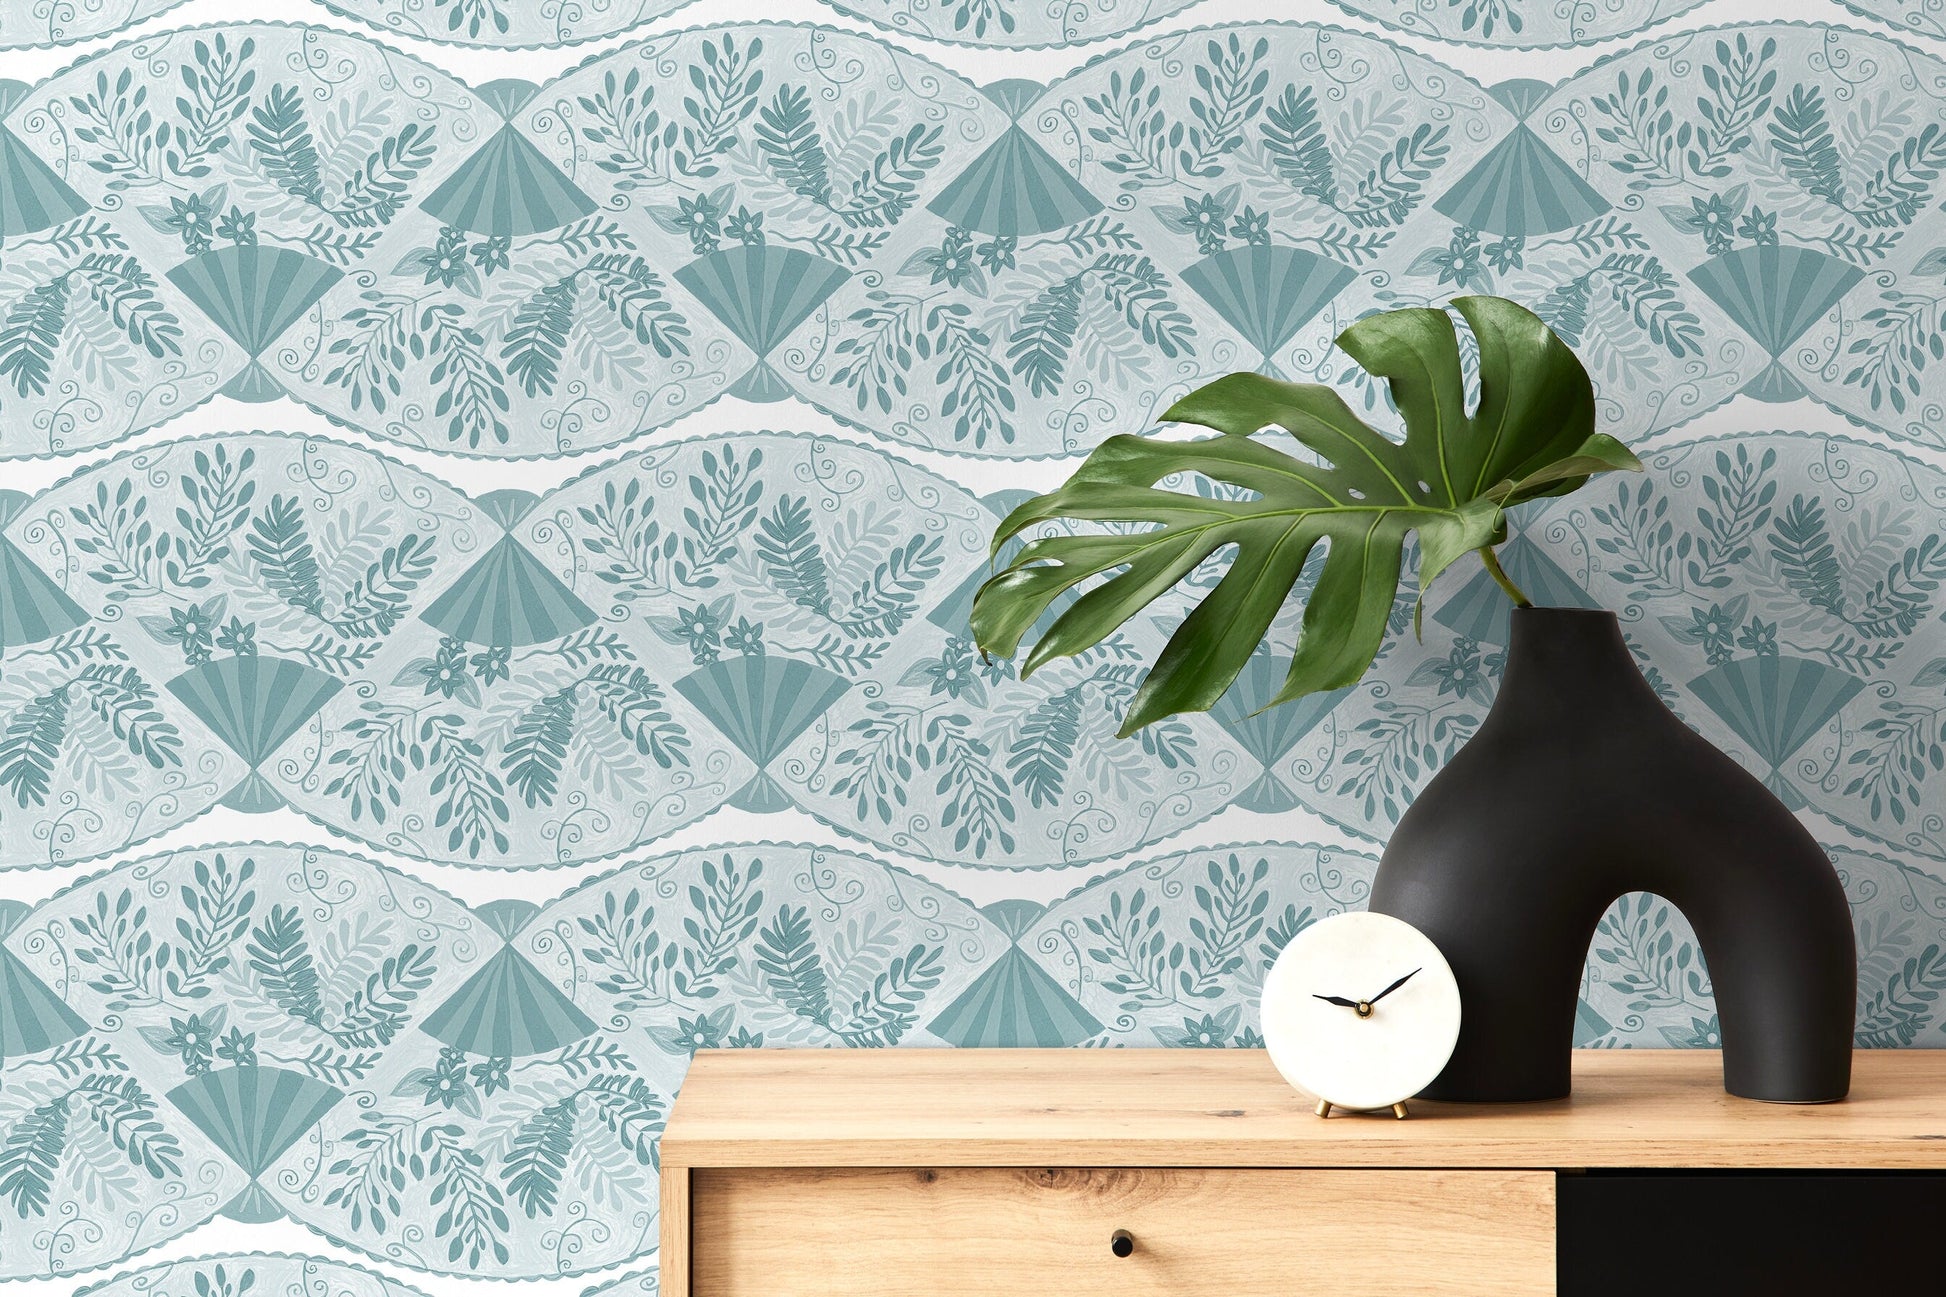 Light Blue Floral and Leaf Wallpaper / Peel and Stick Wallpaper Removable Wallpaper Home Decor Wall Art Wall Decor Room Decor - C946